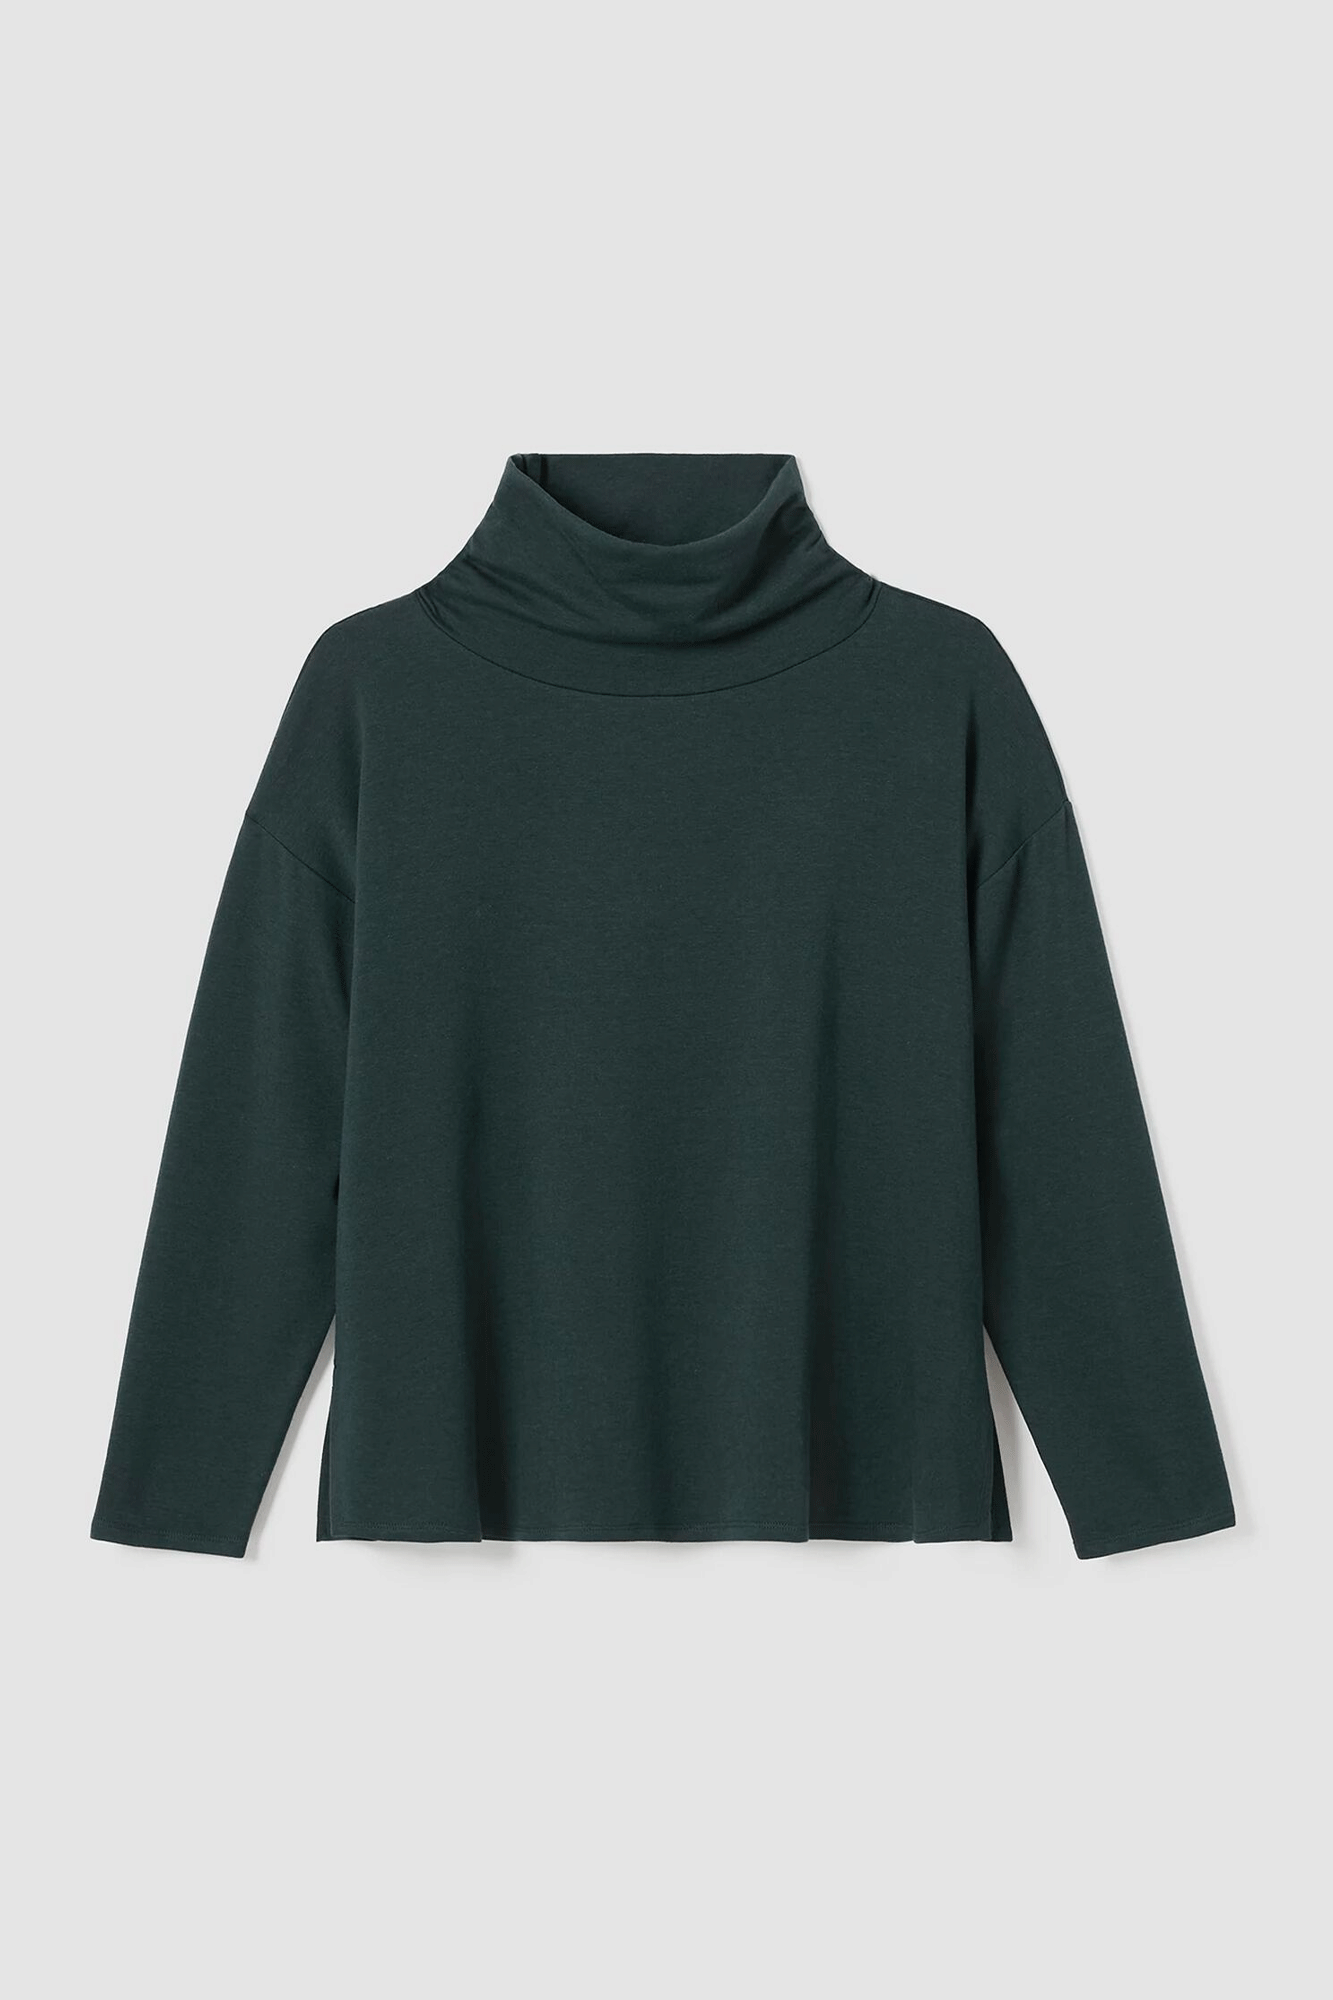 This Drapey Funnel Top from Eileen Fisher is an ideal addition to your wardrobe. Crafted from soft terry fleece with natural stretch, it's cozy yet lightweight for all-day comfort. The relaxed and easy fit of this top ensures a perfect fit and offers a drapey funnel neck. Experience comfort like never before with this Hug!